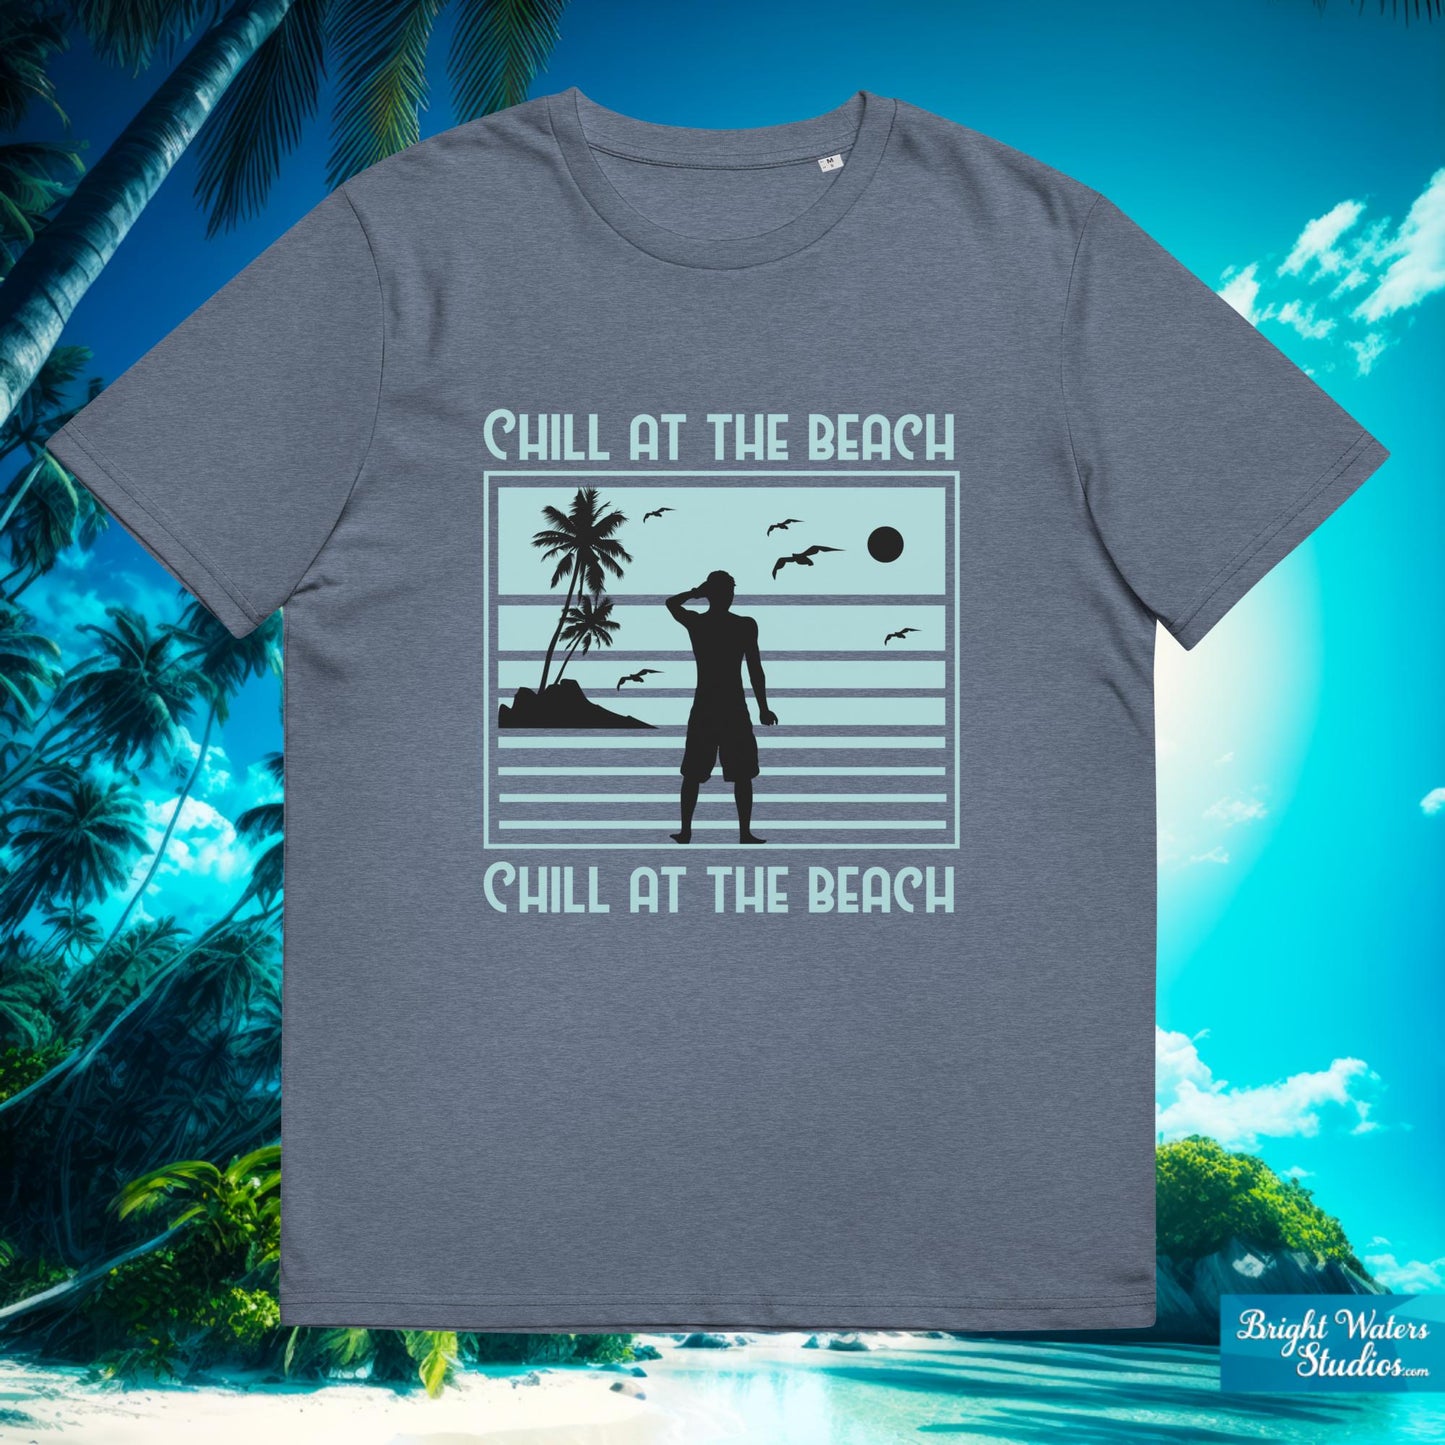 Chill at the Beach T-Shirt